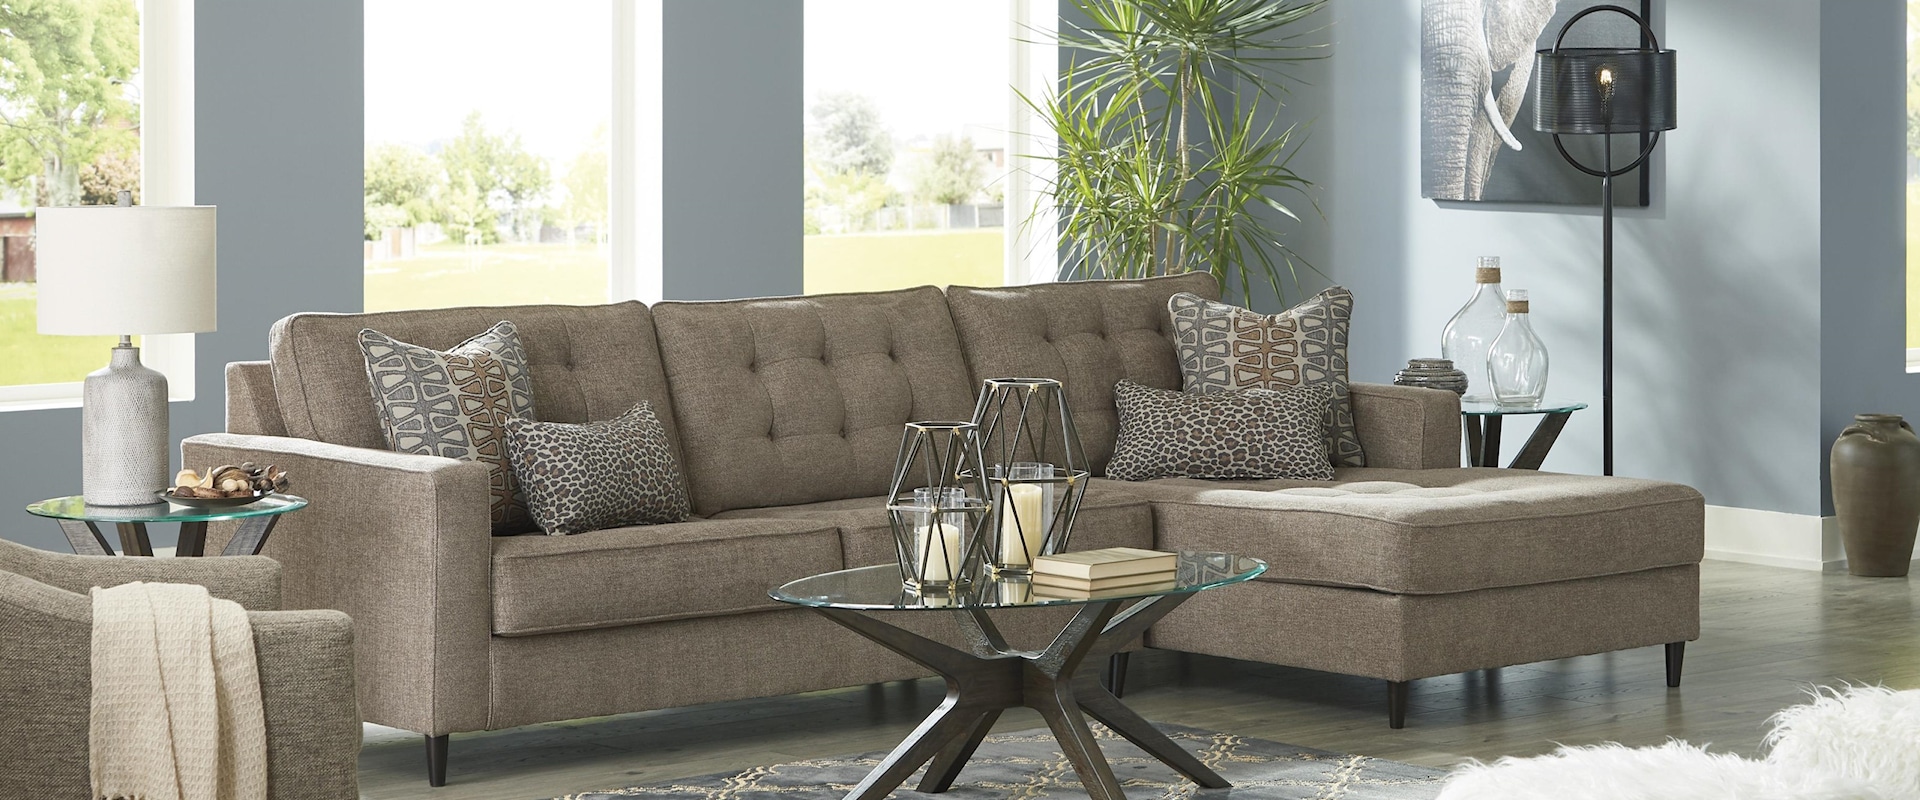 Auburn 2 Piece Sectional Left Arm Facing Sofa and Swivel Glider Chair Set